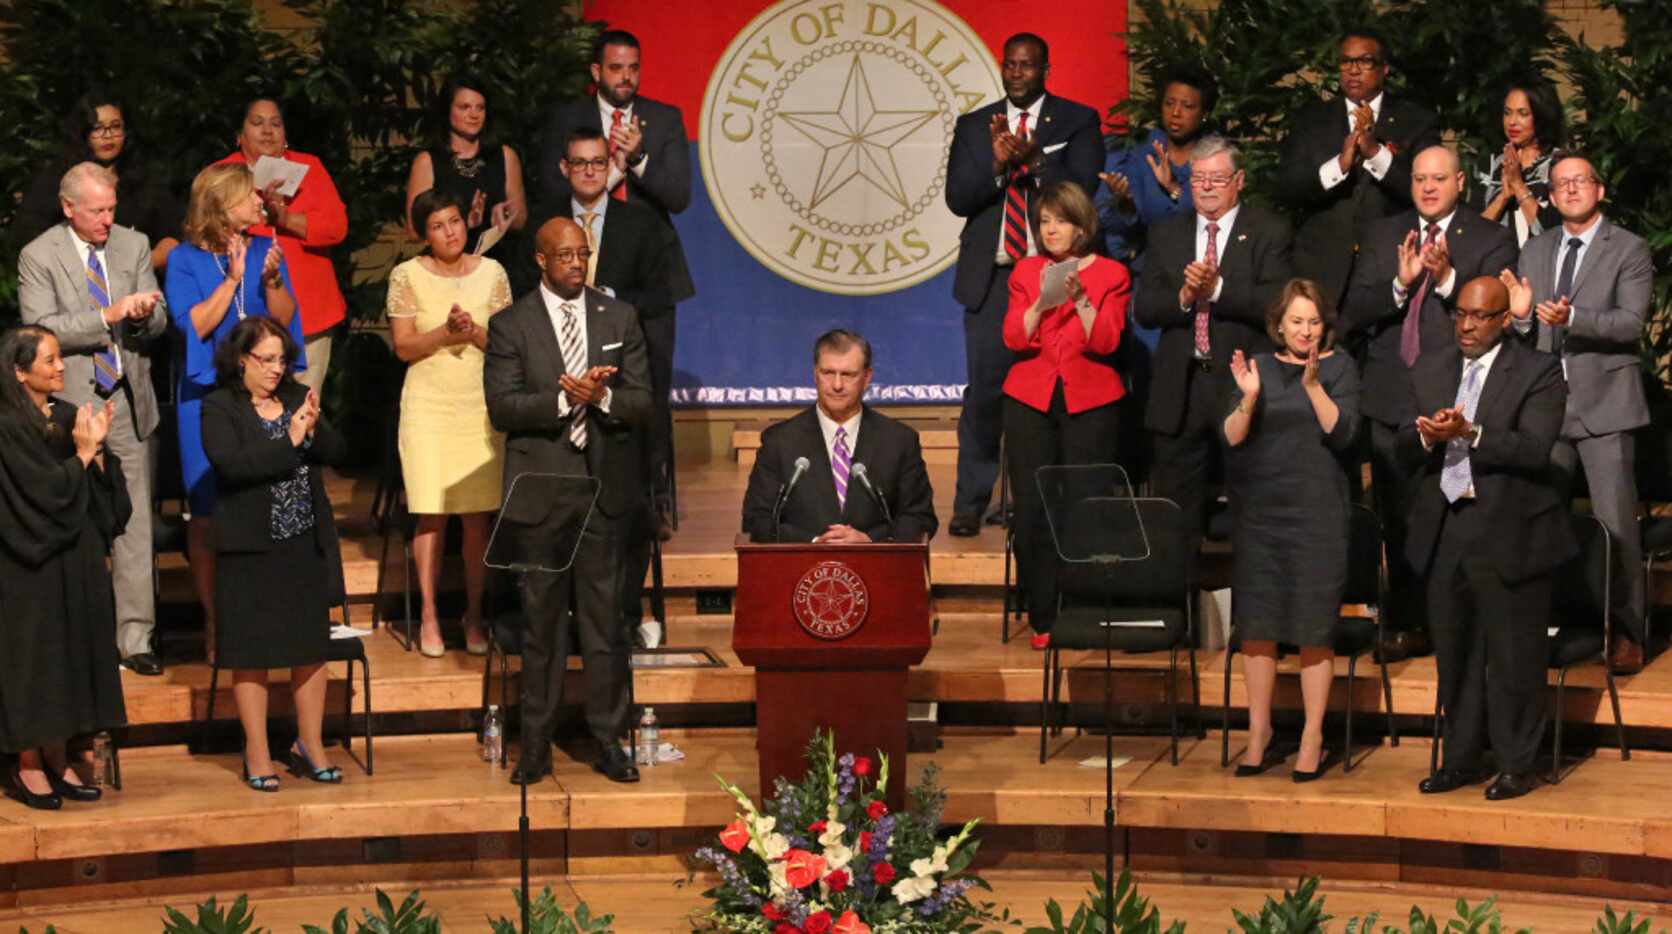 Dallas Mayor Mike Rawlings got a standing ovation during his remarks after the Dallas City...